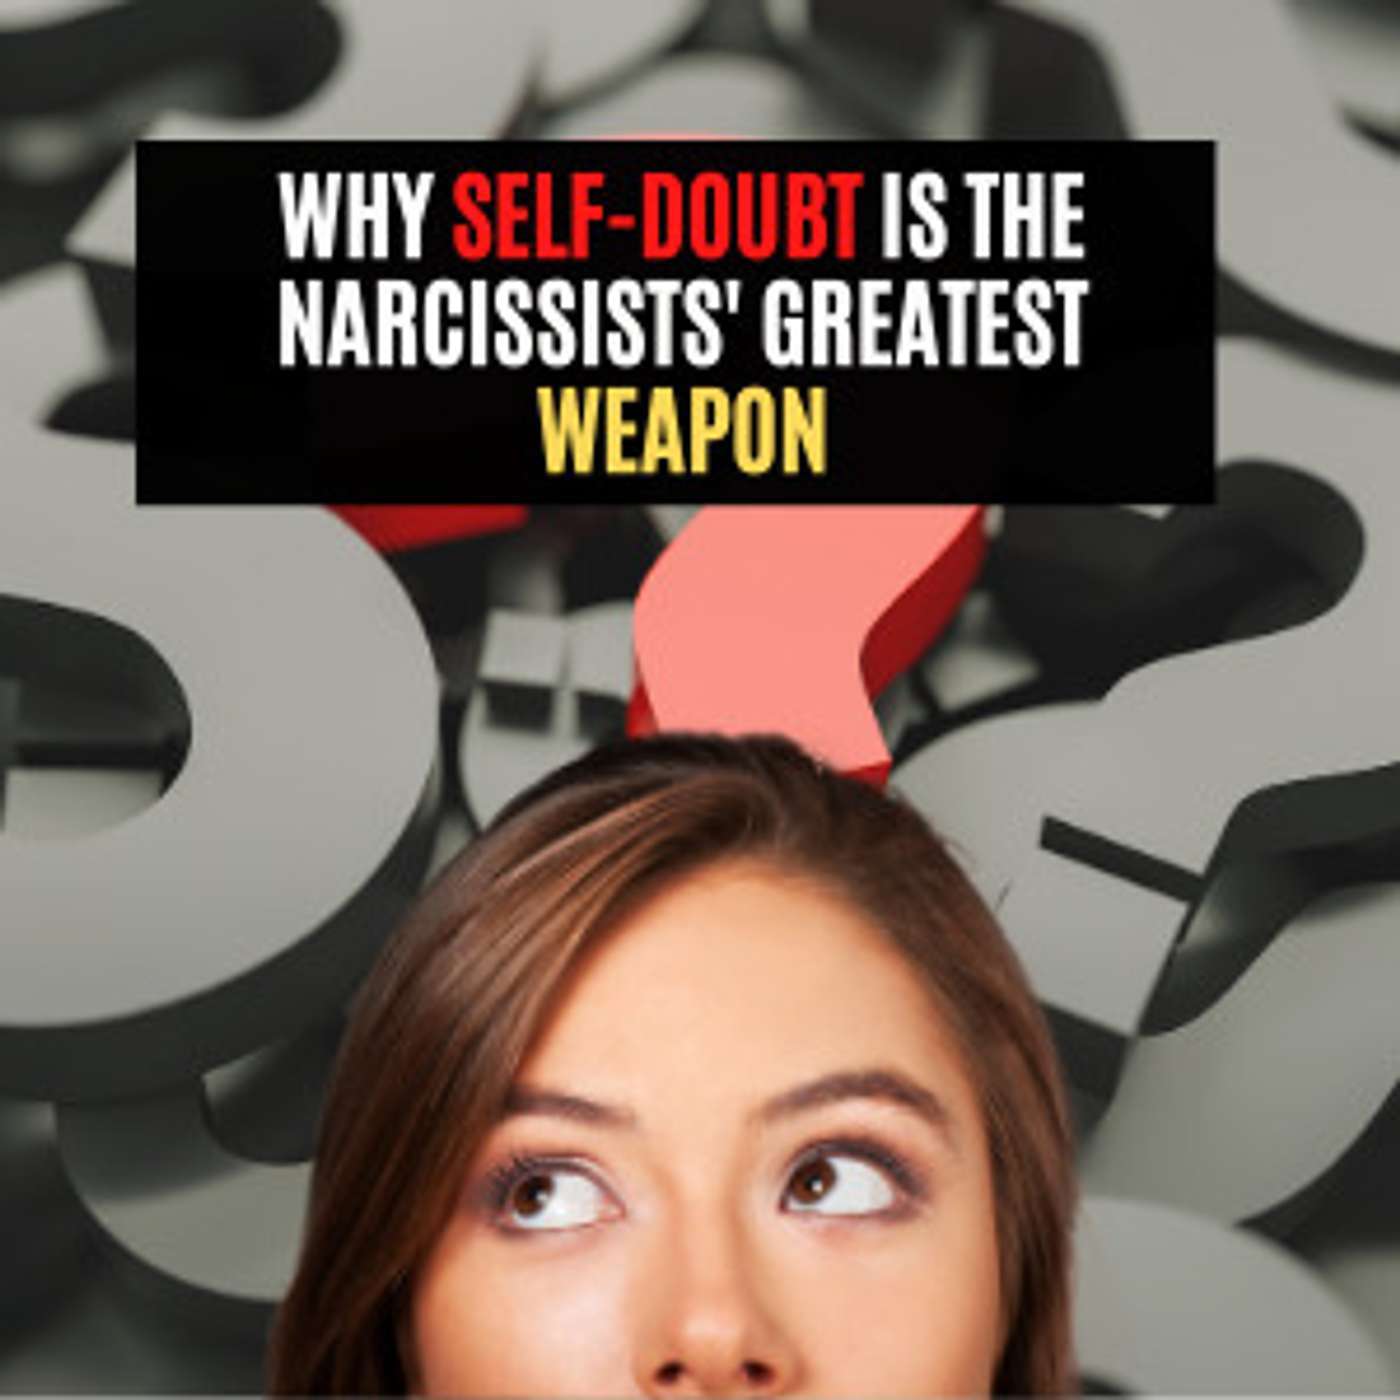 Why Self Doubt is the Narcissists' Greatest Weapon